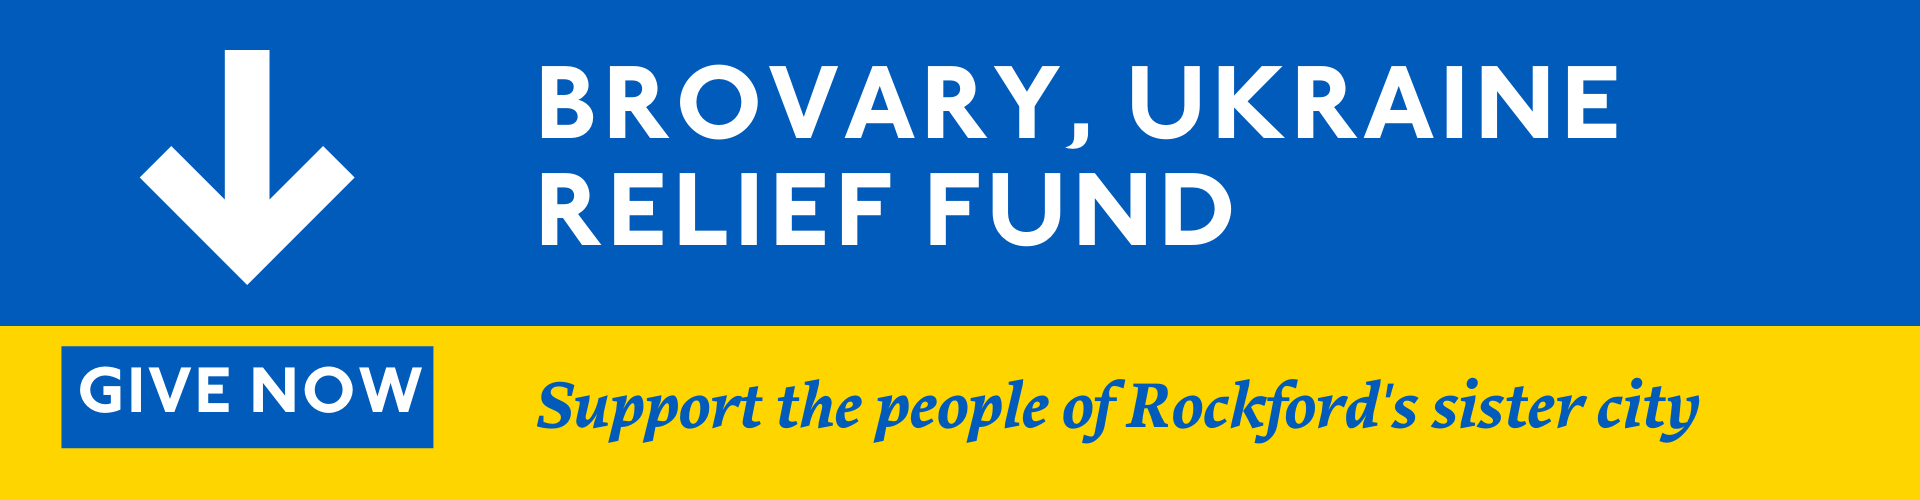 blue and gold background symbolizing the Ukrainian flag. Text reads: Brovary, Ukraine Relief Fund. Support the people of Rockford's sister city. Give now.